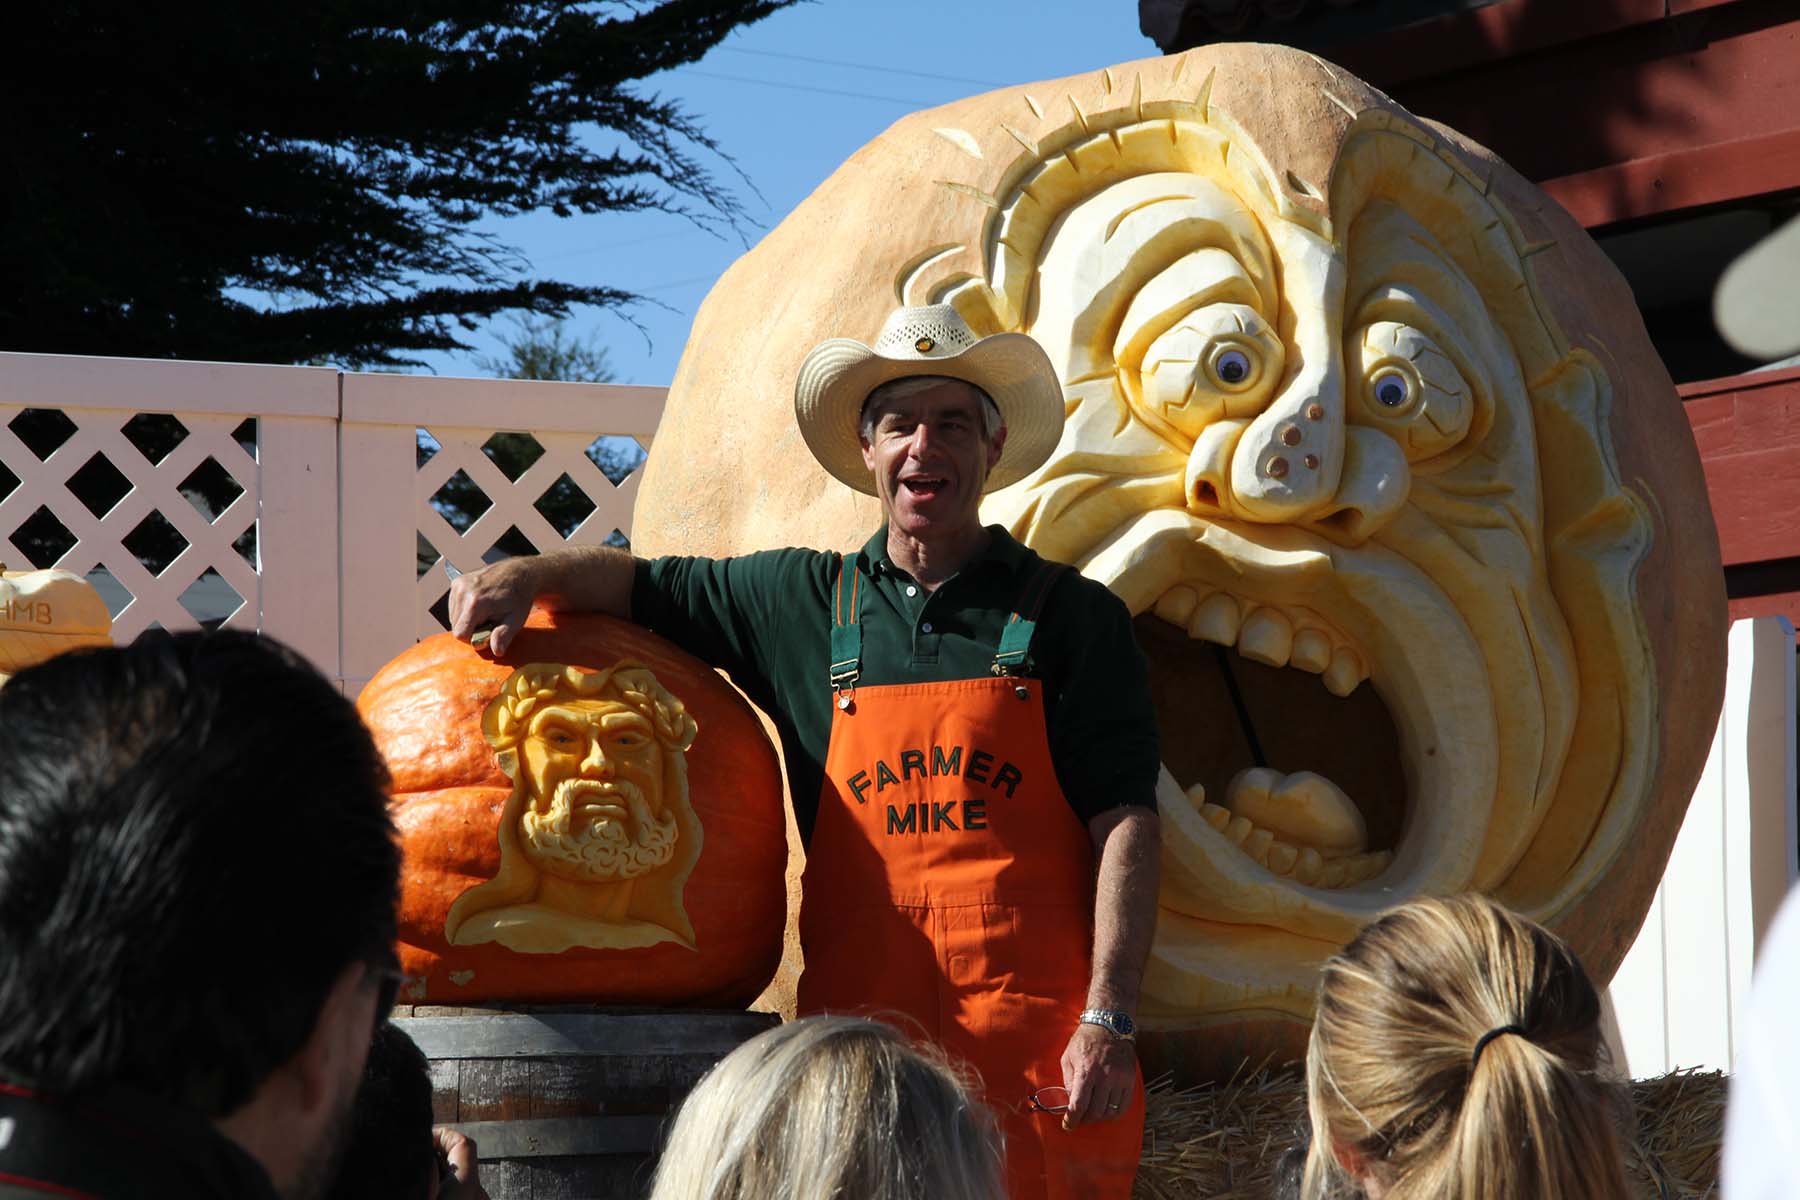 Picasso of Pumpkin Carvers' to show off incredible gourds at HMB festi...